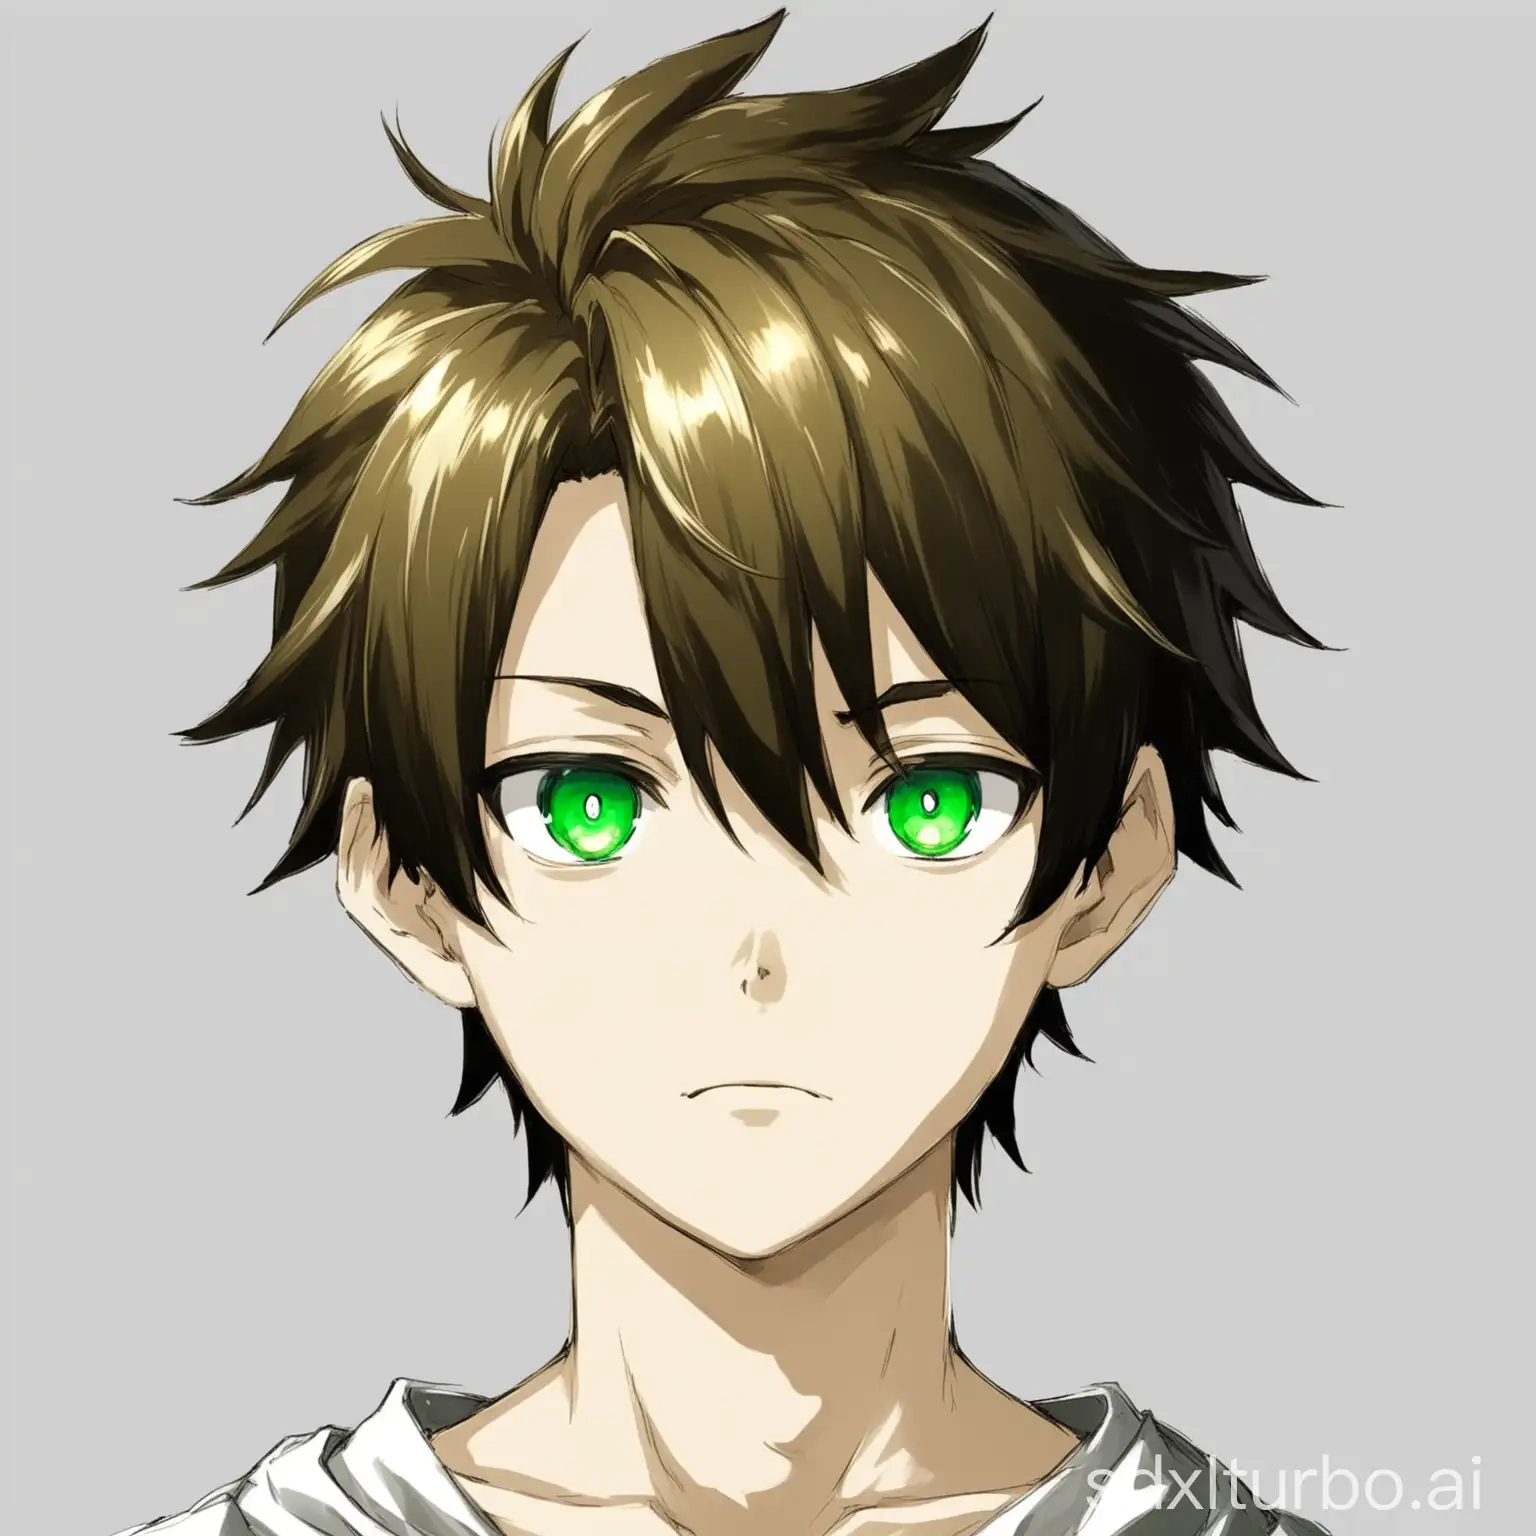 anime character head only, 18 years old looking boy, white tone skin, with dark gold hair, green eyes, small nose